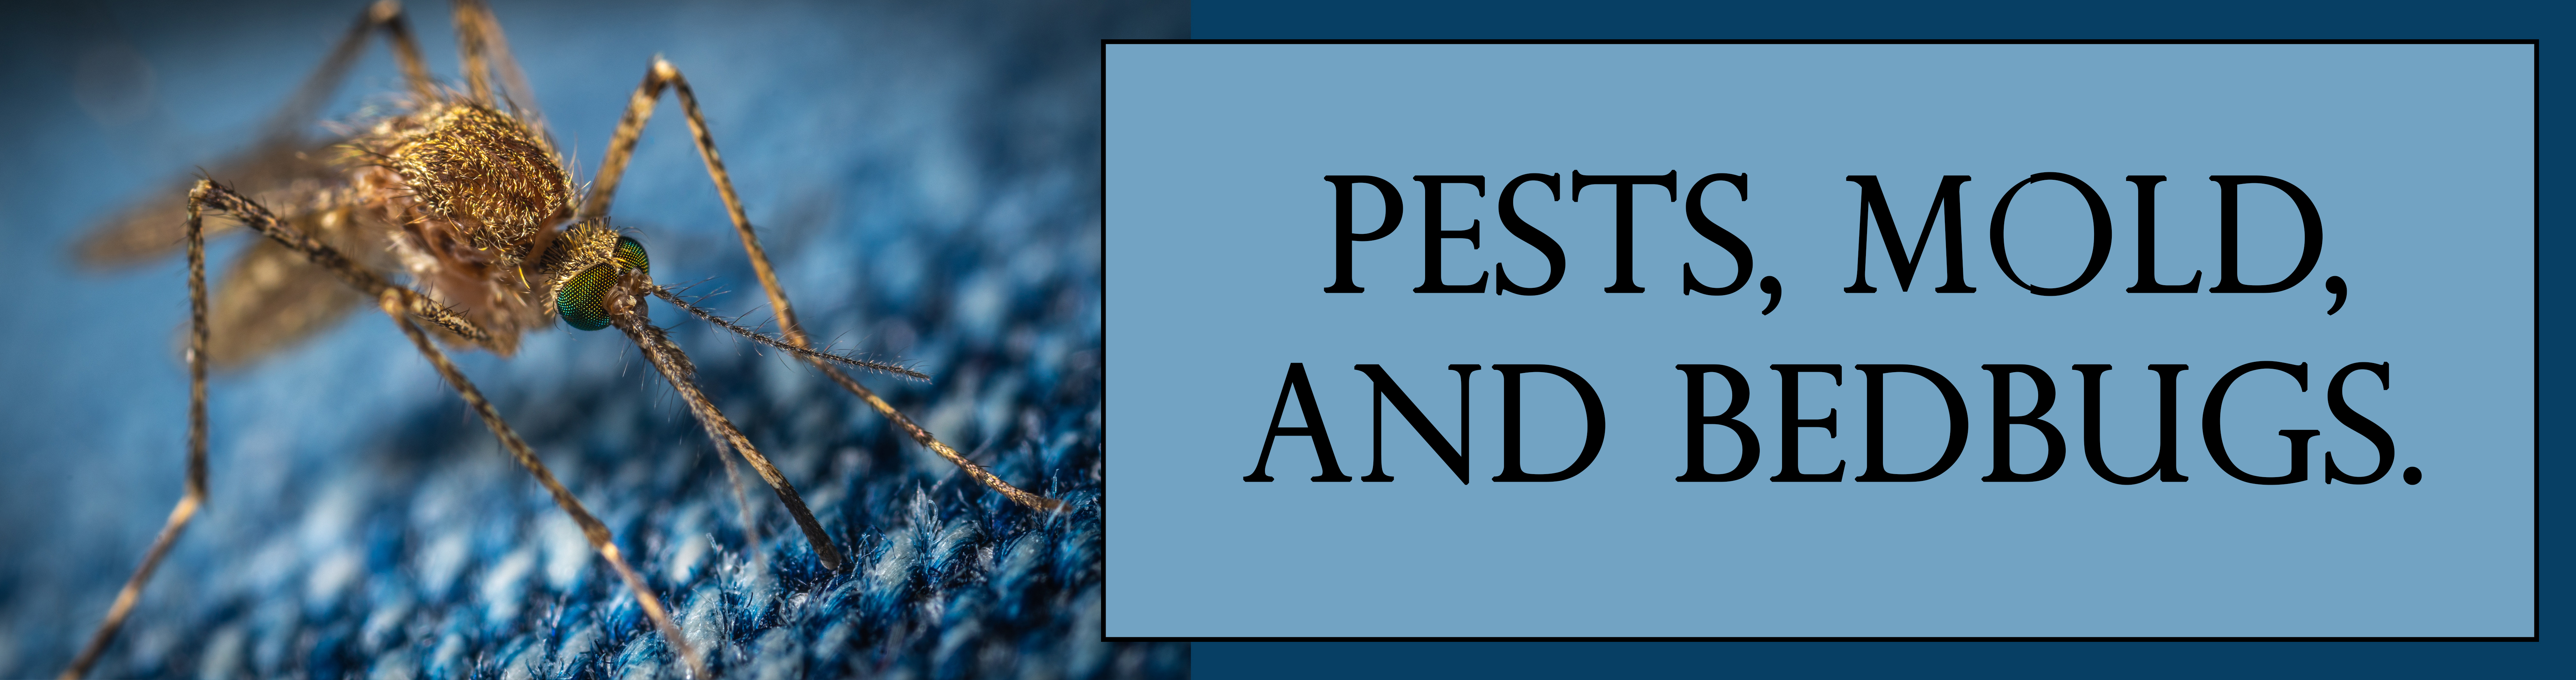 Pest, Mold, and Bedbugs Banner